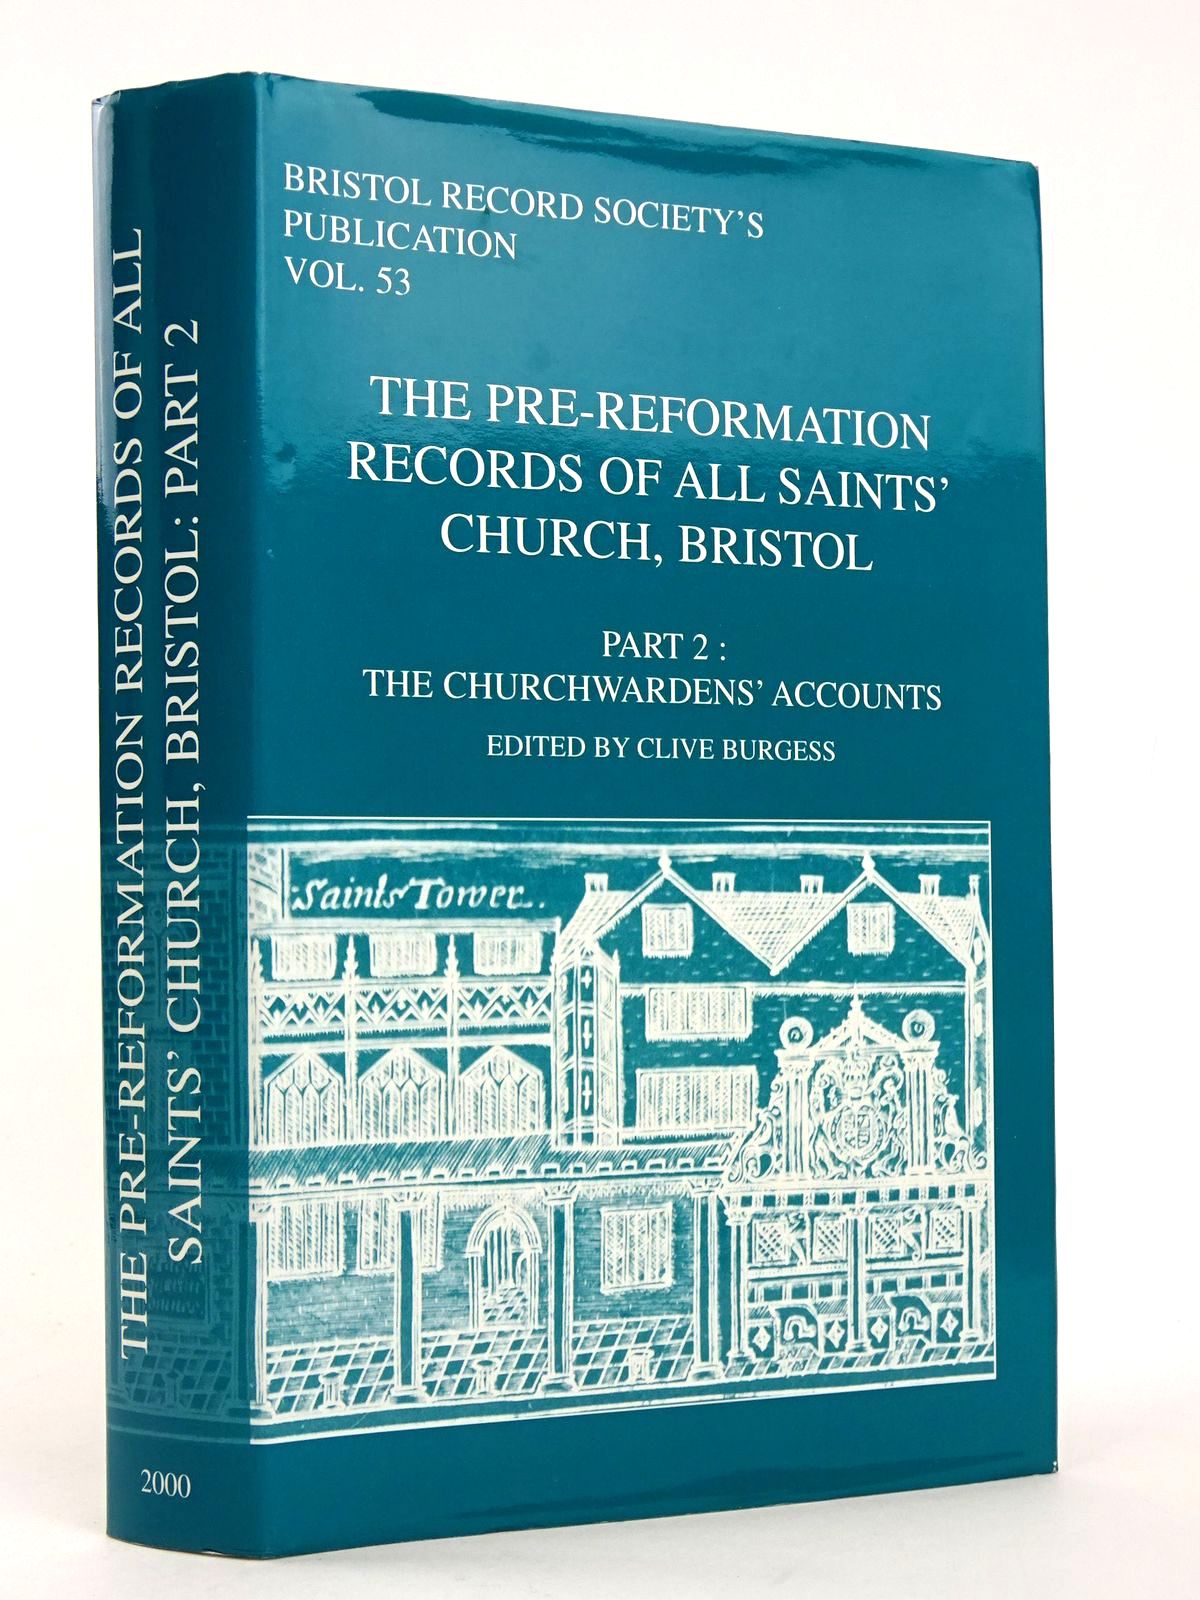 Photo of THE PRE-REFORMATION RECORD OF ALL SAINTS' CHURCH, BRISTOL: THE CHURCHWARDENS' ACCOUNTS written by Burgess, Clive published by Bristol Record Society (STOCK CODE: 1818356)  for sale by Stella & Rose's Books